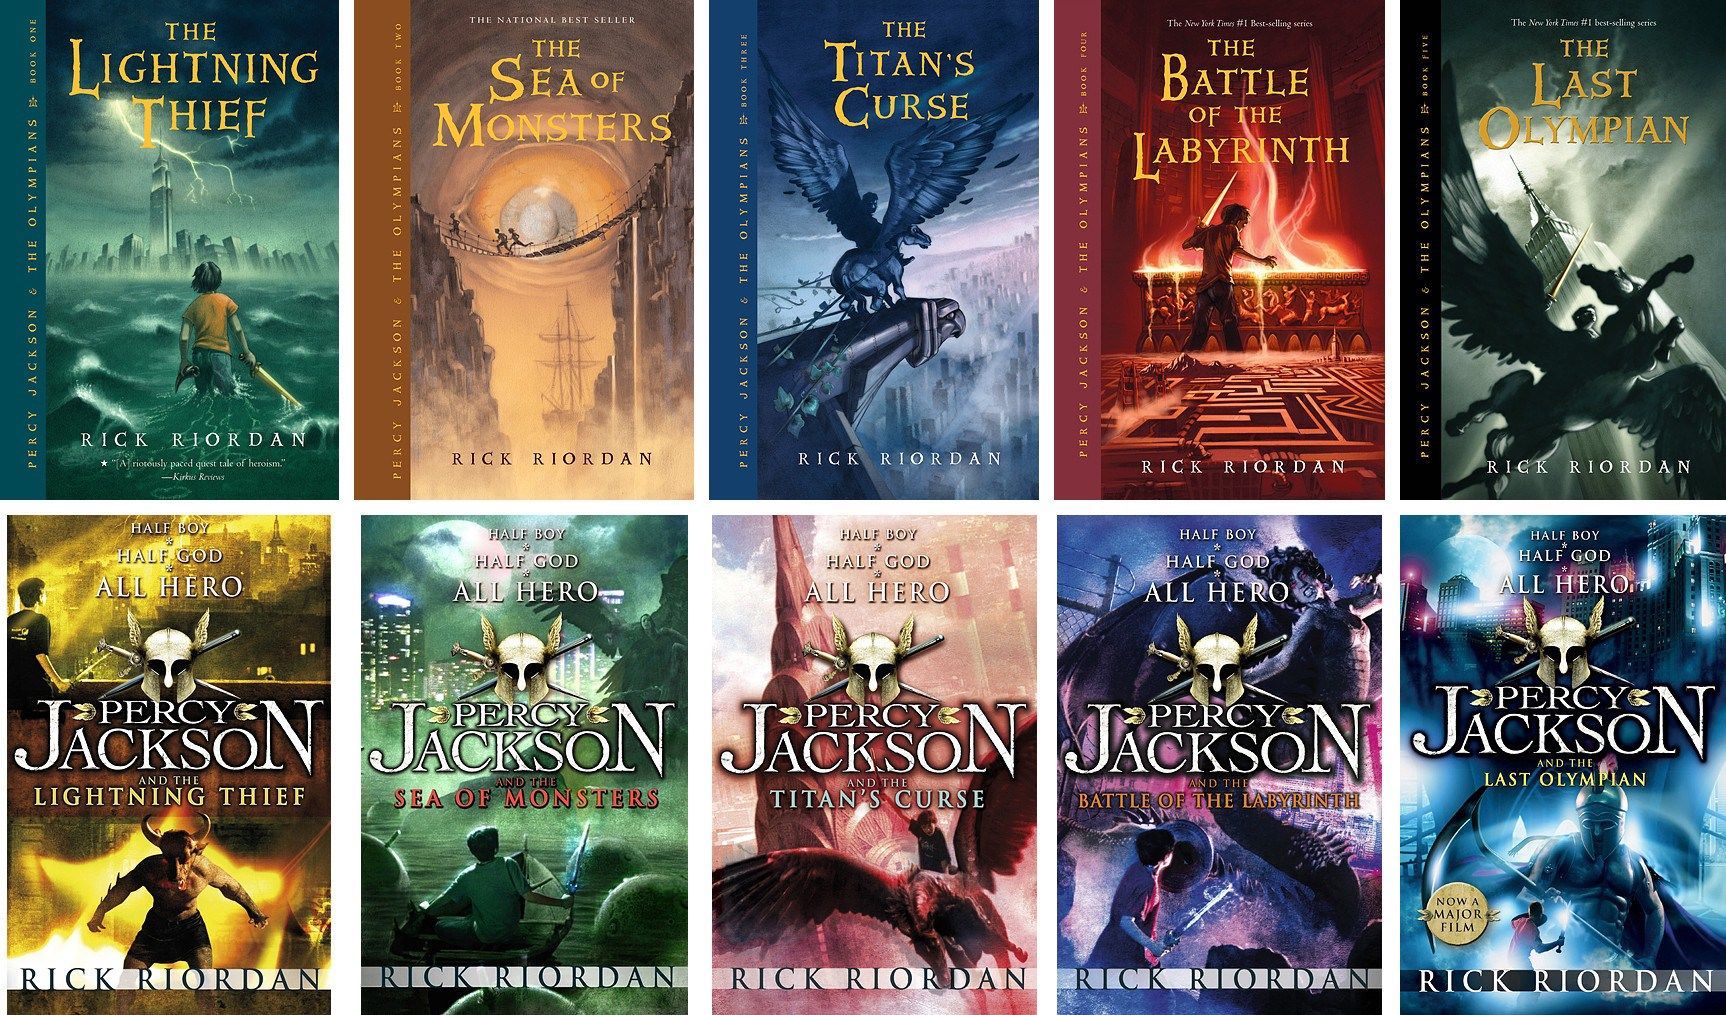 Percy Jackson Update: Outline For Pilot Episode For Disney+ Series Is Nearing Completion